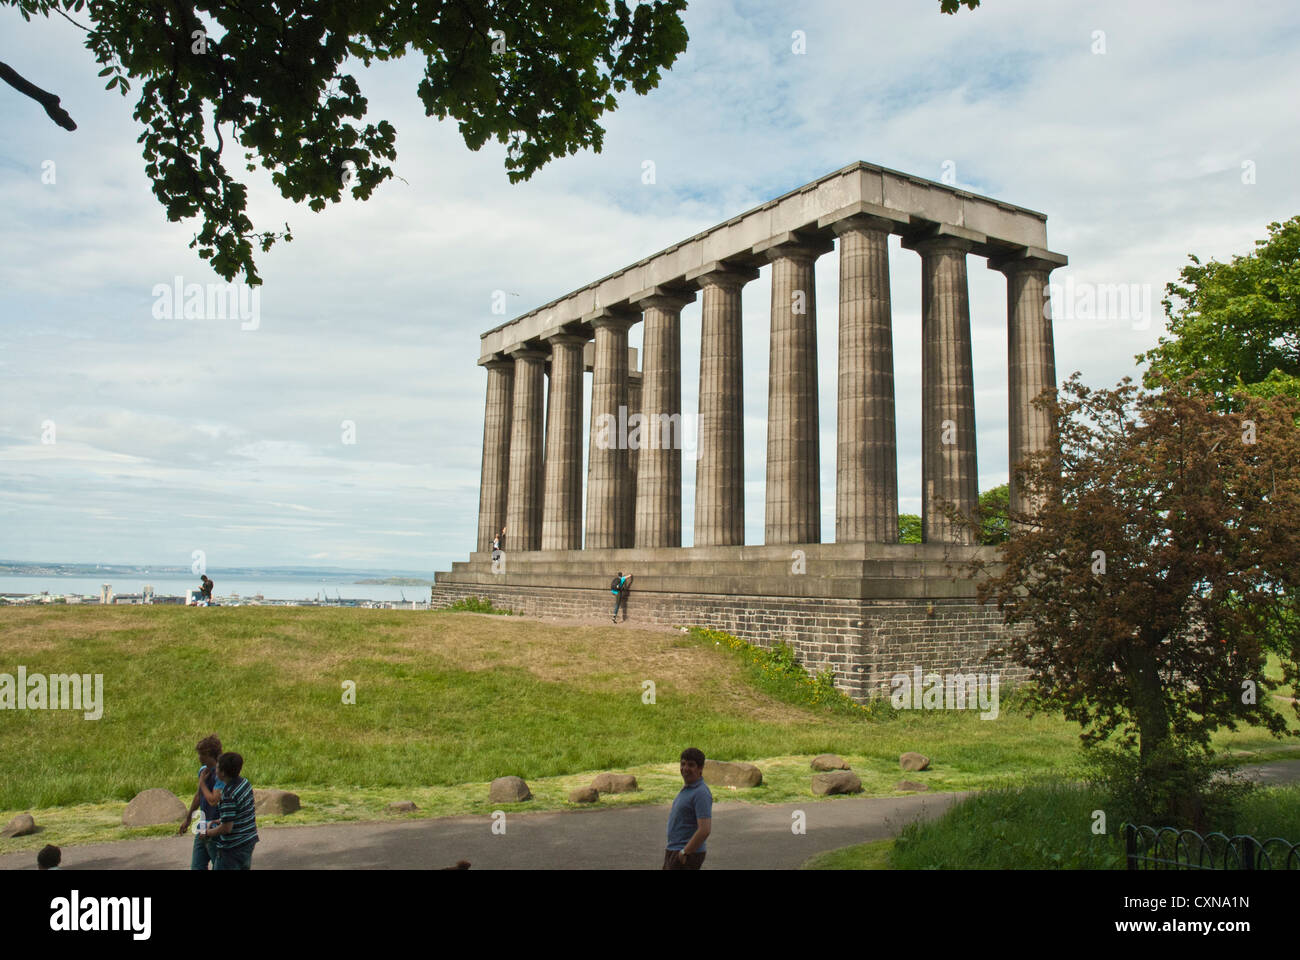 The National Monument, Calton Hill, Edinburgh. Modelled on the Parthenon. Doric columns brightly lit against cloudy skies. Stock Photo